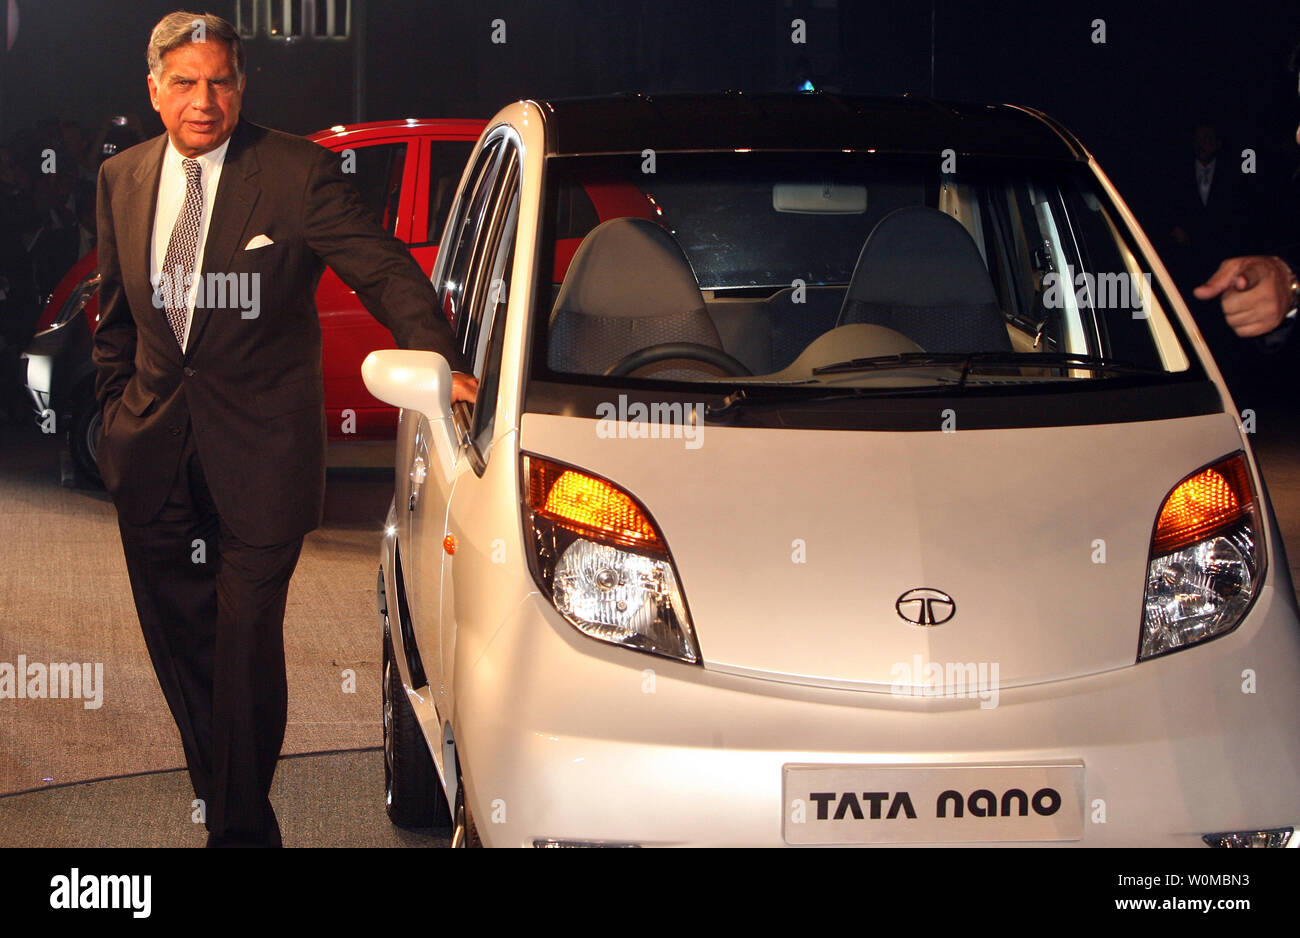 Tata Company Chairman Ratan Tata announces the newly launched Tata Nano at the 9th Auto Expo in New Delhi, India, Thursday, January 10, 2008. India's Tata Motors unveiled its much anticipated US$2,500 car, an ultracheap price tag that brings car ownership into the reach of tens of millions of people across the world. Tata claims that the Nano is the world's cheapest car.  (UPI Photo) Stock Photo